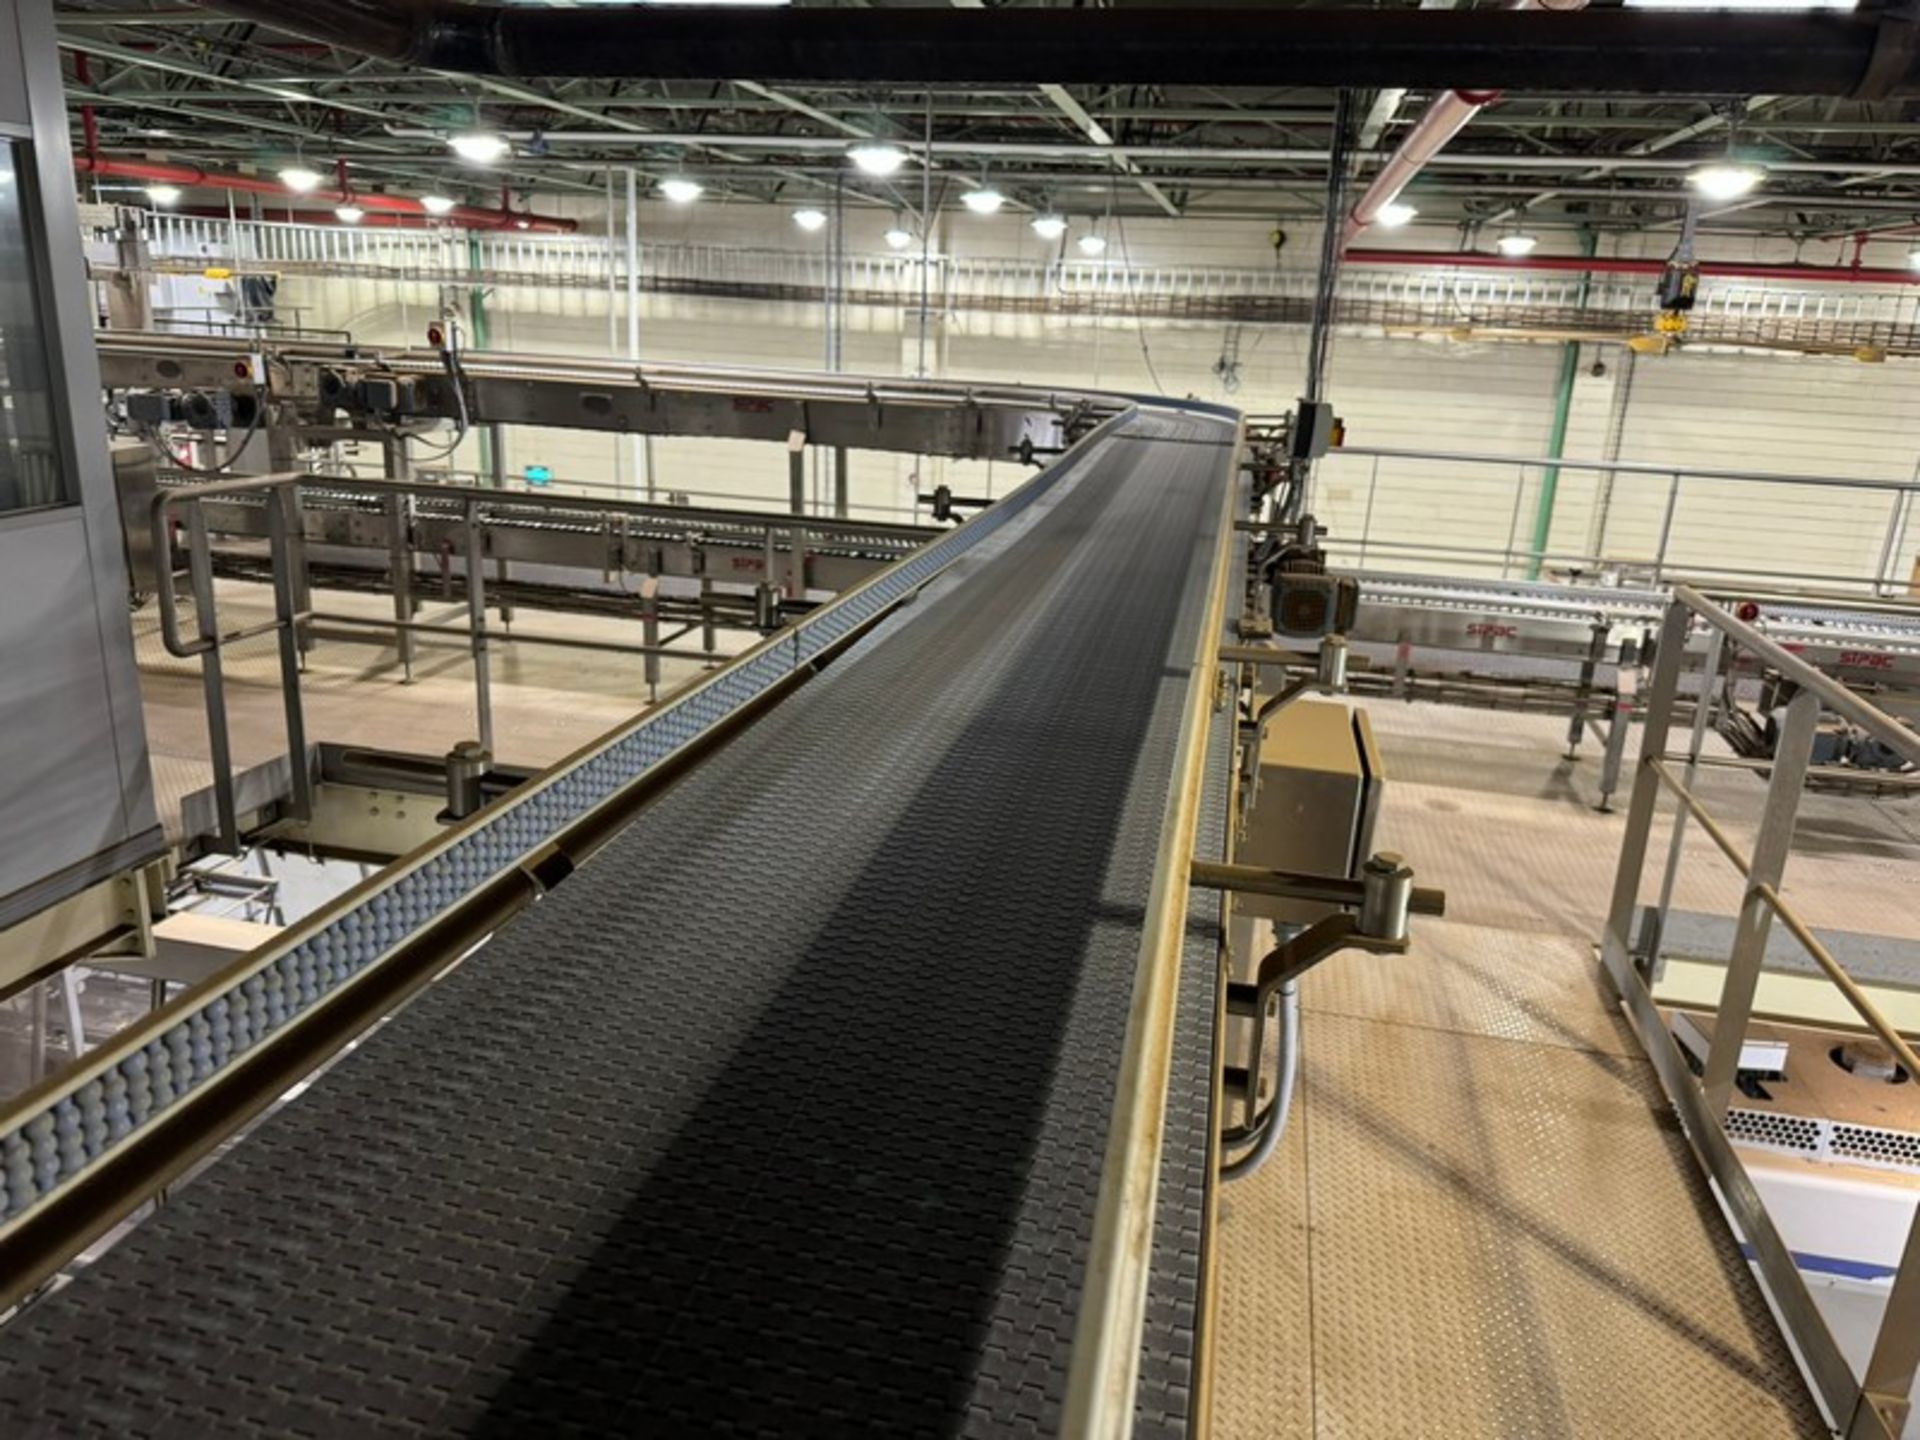 SIPAC Conveyor, with 1- 90 Degree Turn, Aprox. 40 ft. L, with Aprox. 15” W Plastic Belt, Mounted - Image 8 of 8